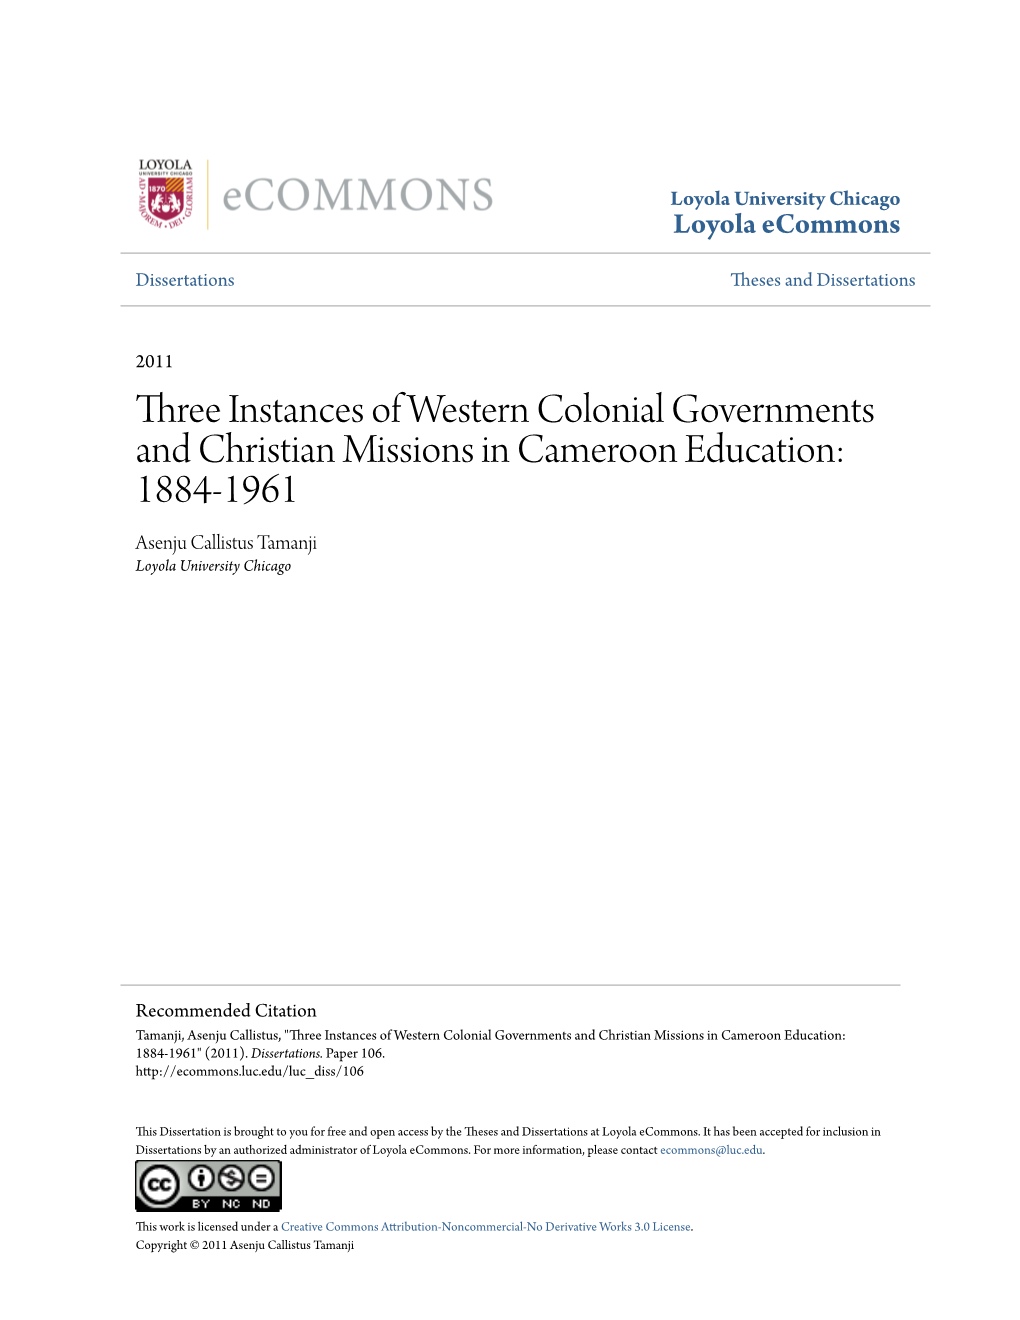 Three Instances of Western Colonial Governments and Christian Missions in Cameroon Education: 1884-1961 Asenju Callistus Tamanji Loyola University Chicago